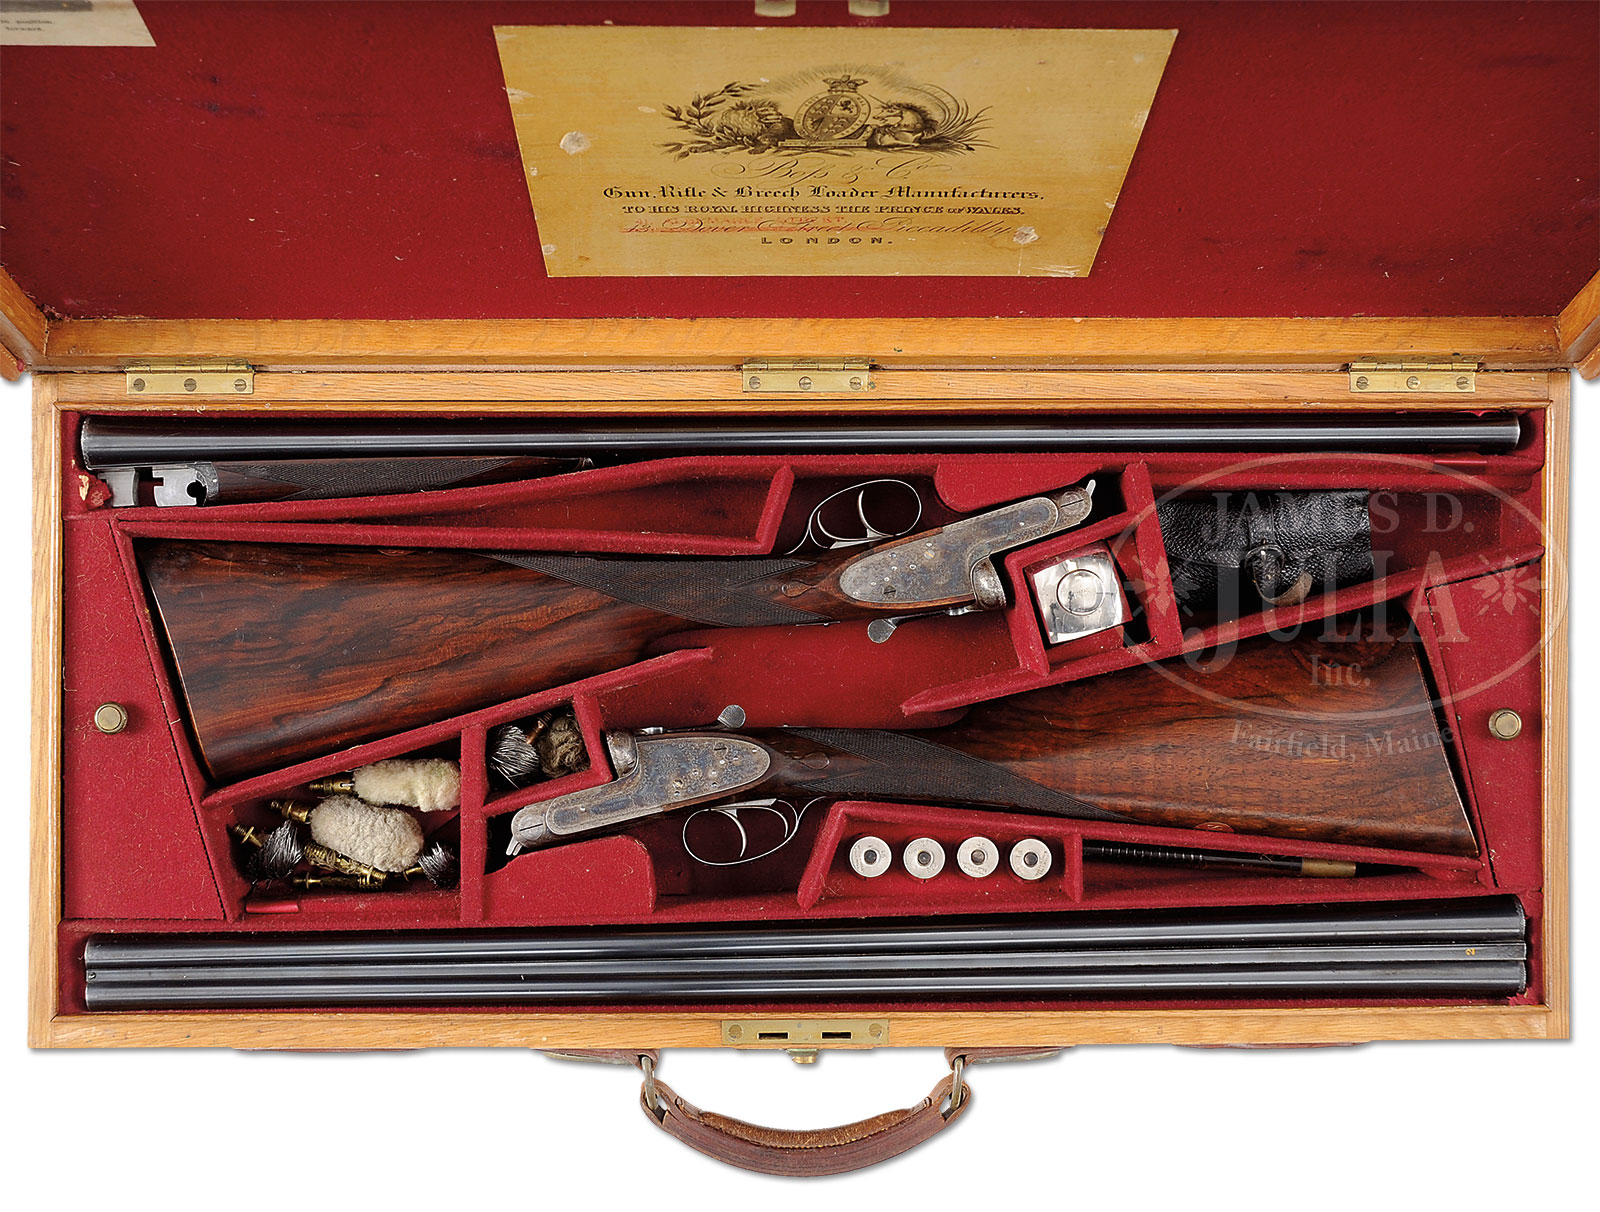 TRULY SUPERB, AS FOUND, HIGH ORIGINAL CONDITION, LIGHTWEIGHT PAIR OF 16 GAUGE “GOLDEN AGE” BOSS SIDELOCK EJECTOR DOUBLE TRIGGER LIGHT GAME SHOTGUNS MADE FOR MRS. DODGE SLOAN, HEIRESS, SOCIALITE, SPORTS WOMAN, AND OWNER OF A MAJOR HORSE RACING STABLE, WITH ORIGINAL CASE AND ACCESSORIES.